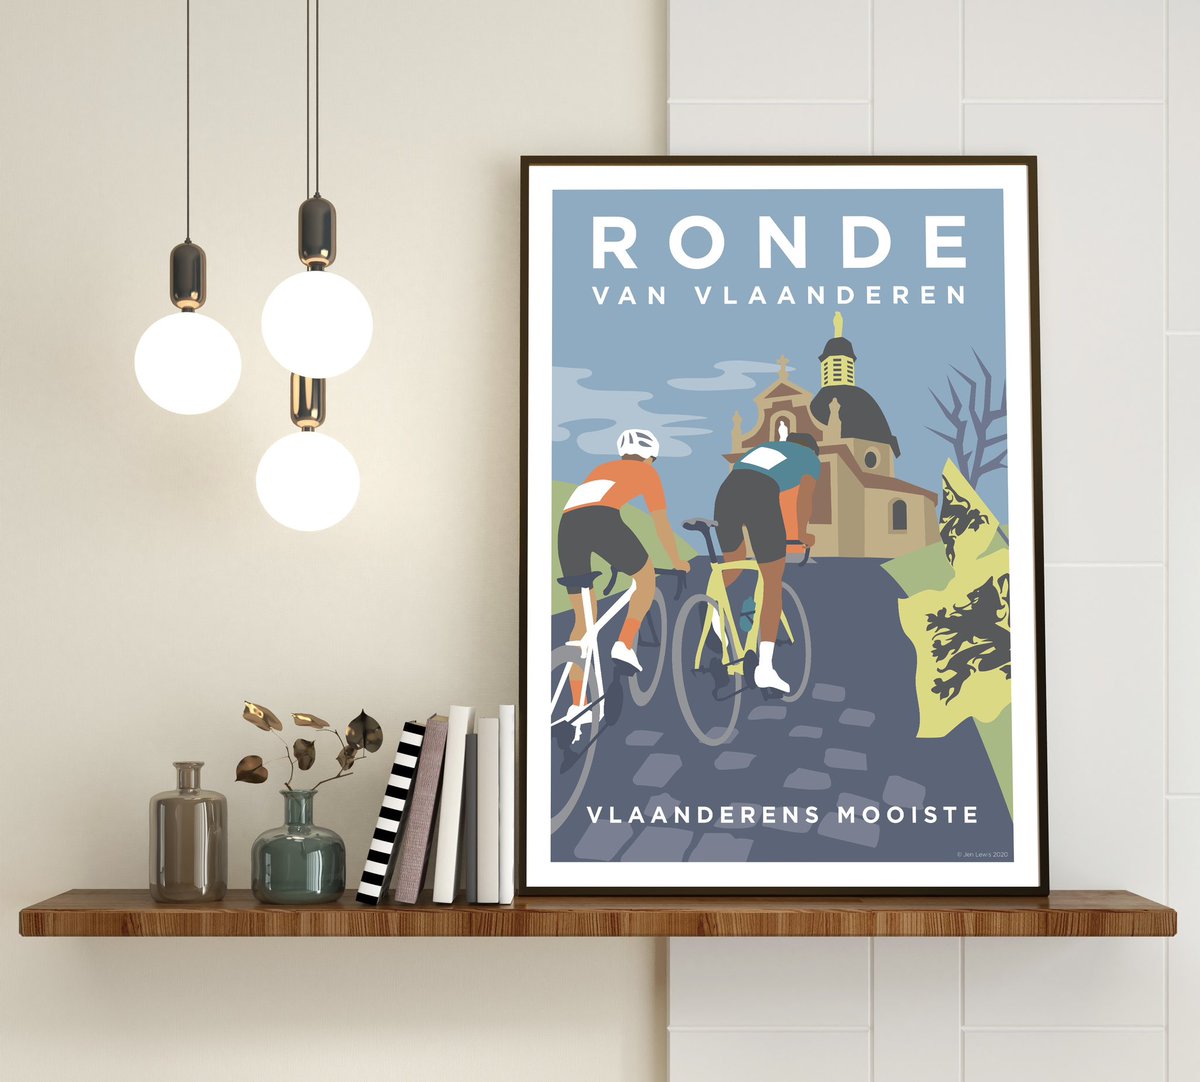 GIVEAWAY COMPETITION!
It's @RondeVlaanderen tomorrow! 

Time for another giveaway to WIN an A4 print...

To enter:

1️⃣Follow me!
2️⃣Retweet this post!

Winner will be announced tomorrow night. Good luck! PS 15% off this print all weekend if you don’t win 😉
#rondevanvlaanderen